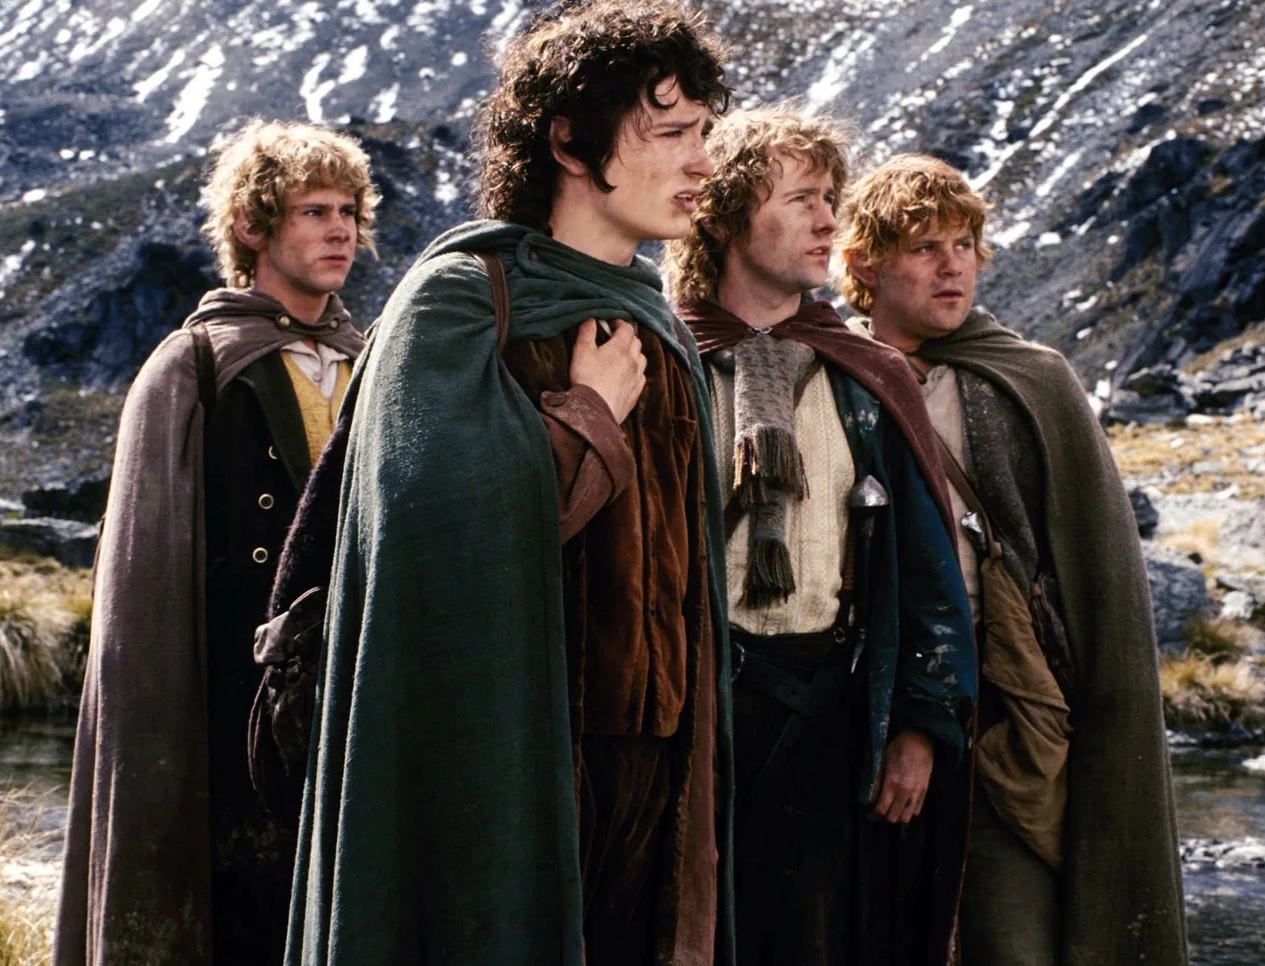 movies that hit a climax and kept going - 4 hobbits